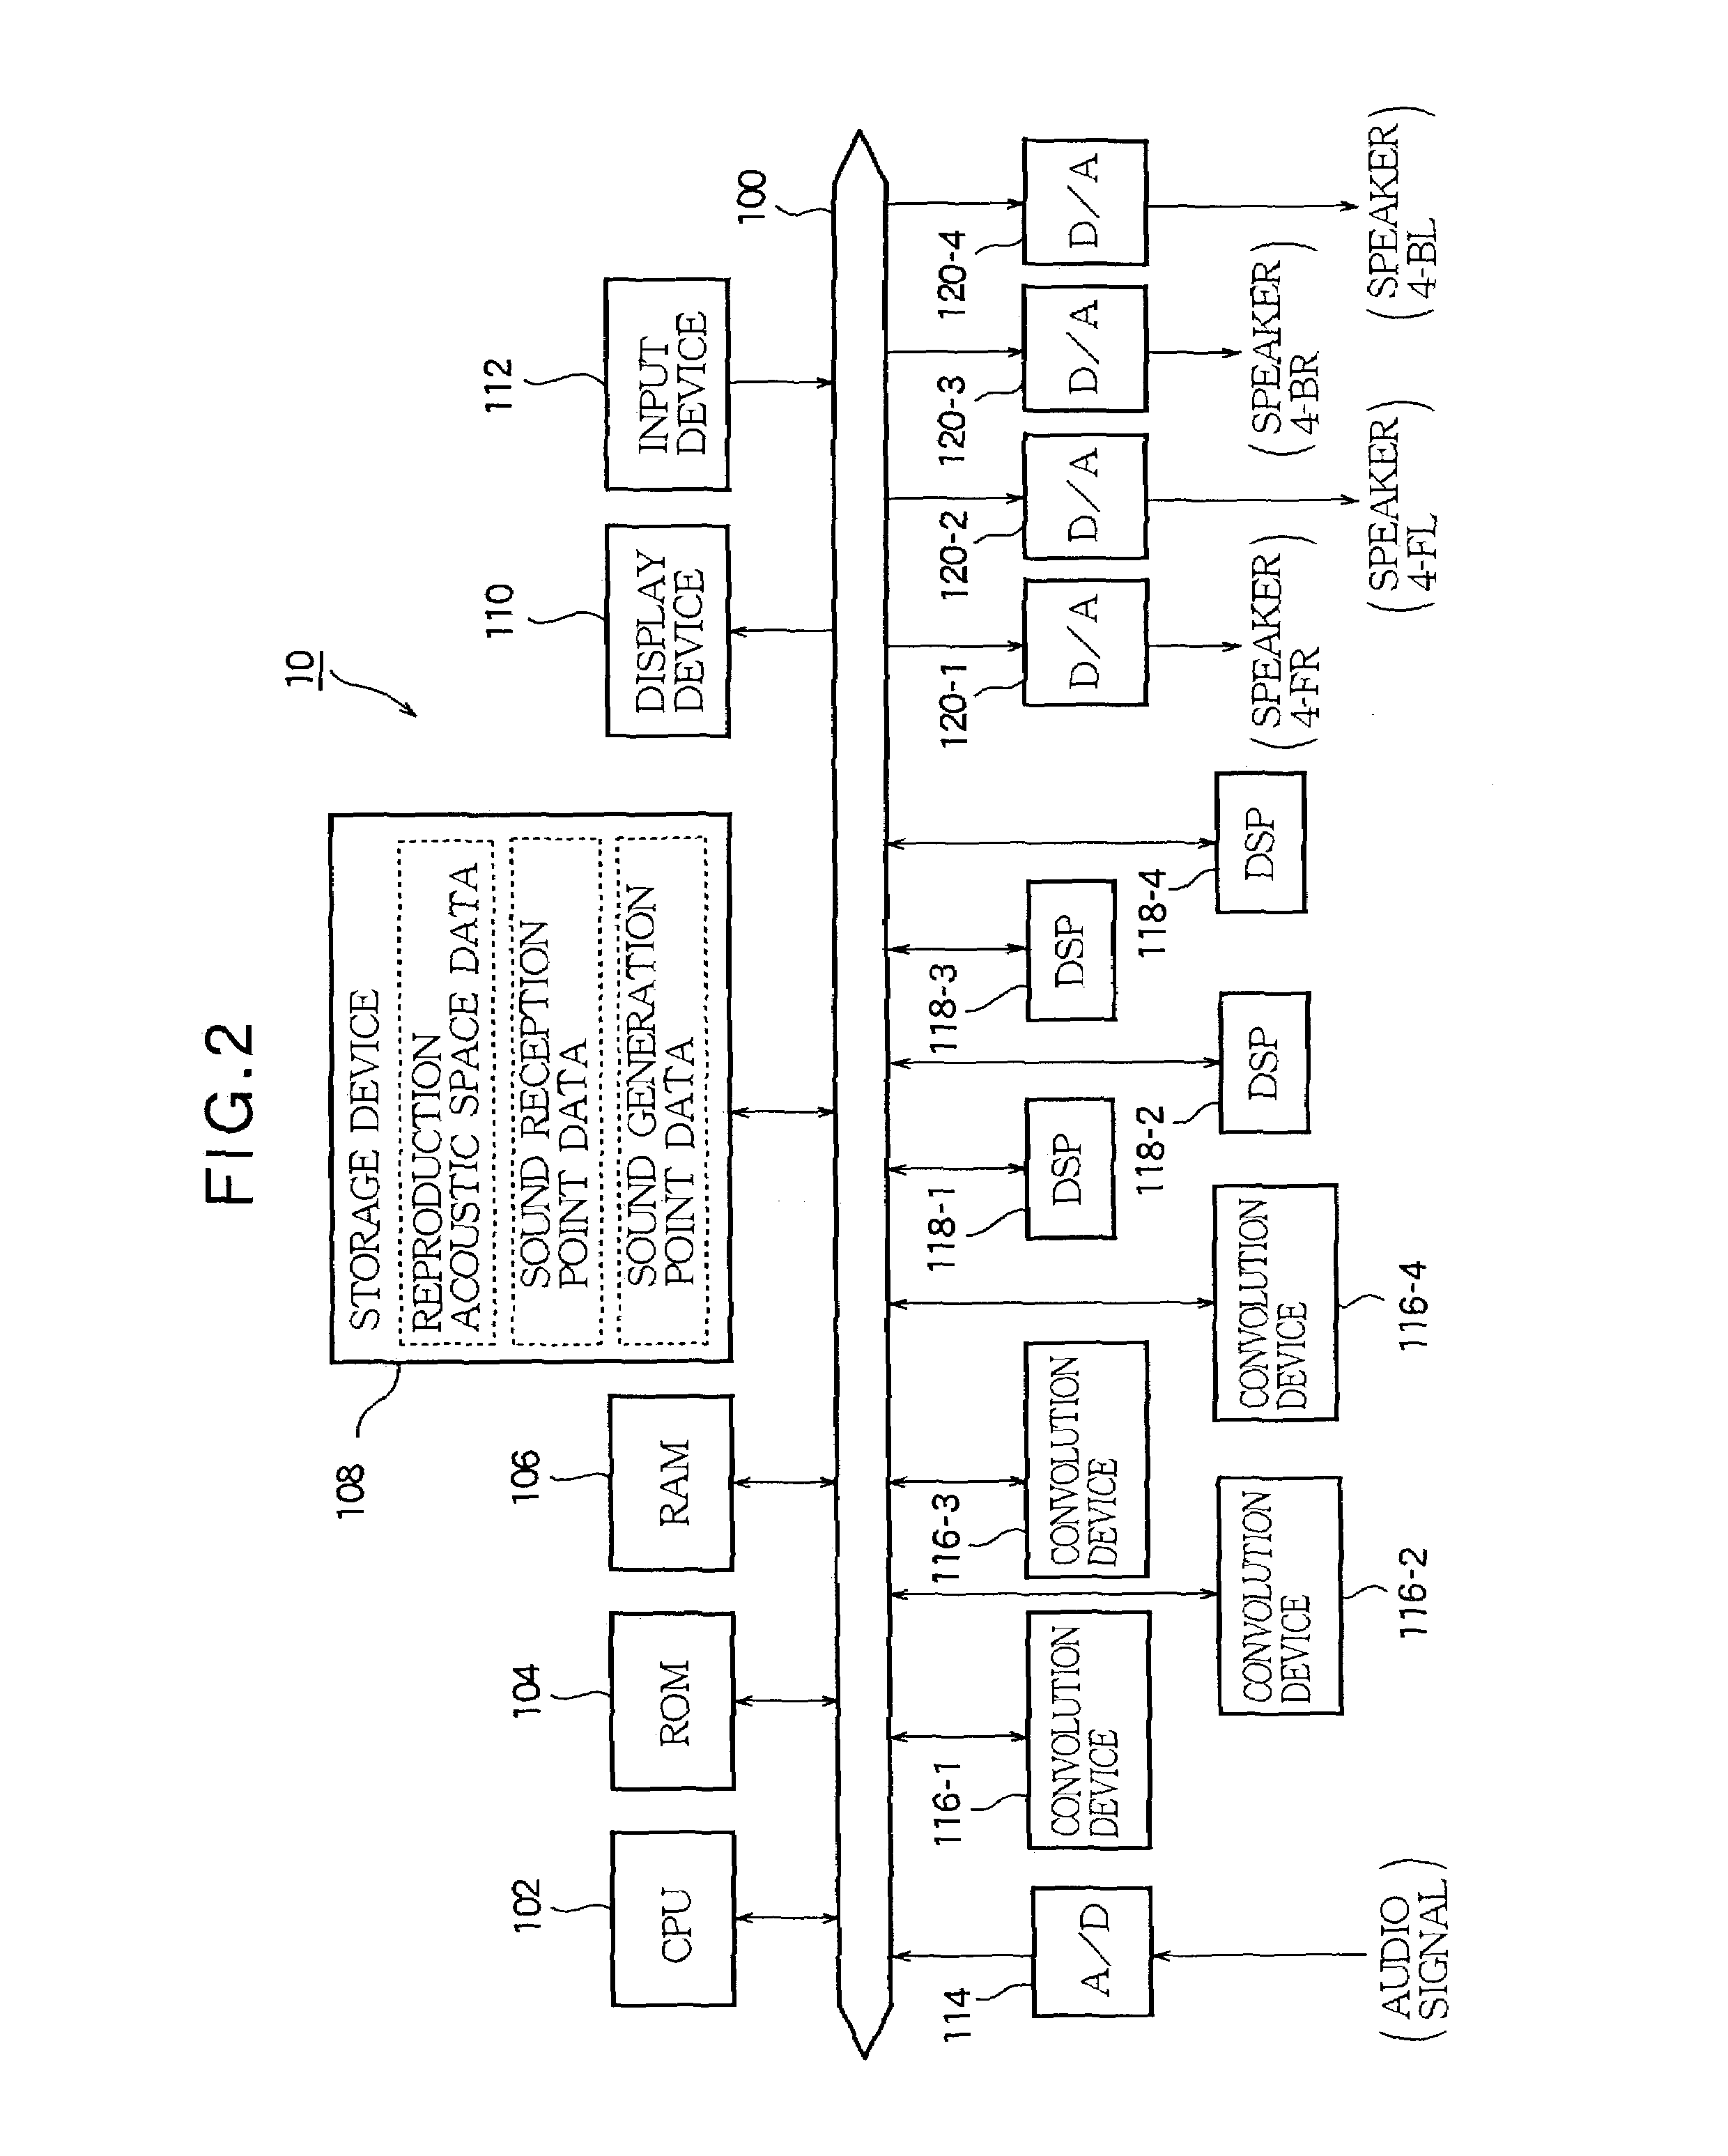 Method of creating reverberation by estimation of impulse response